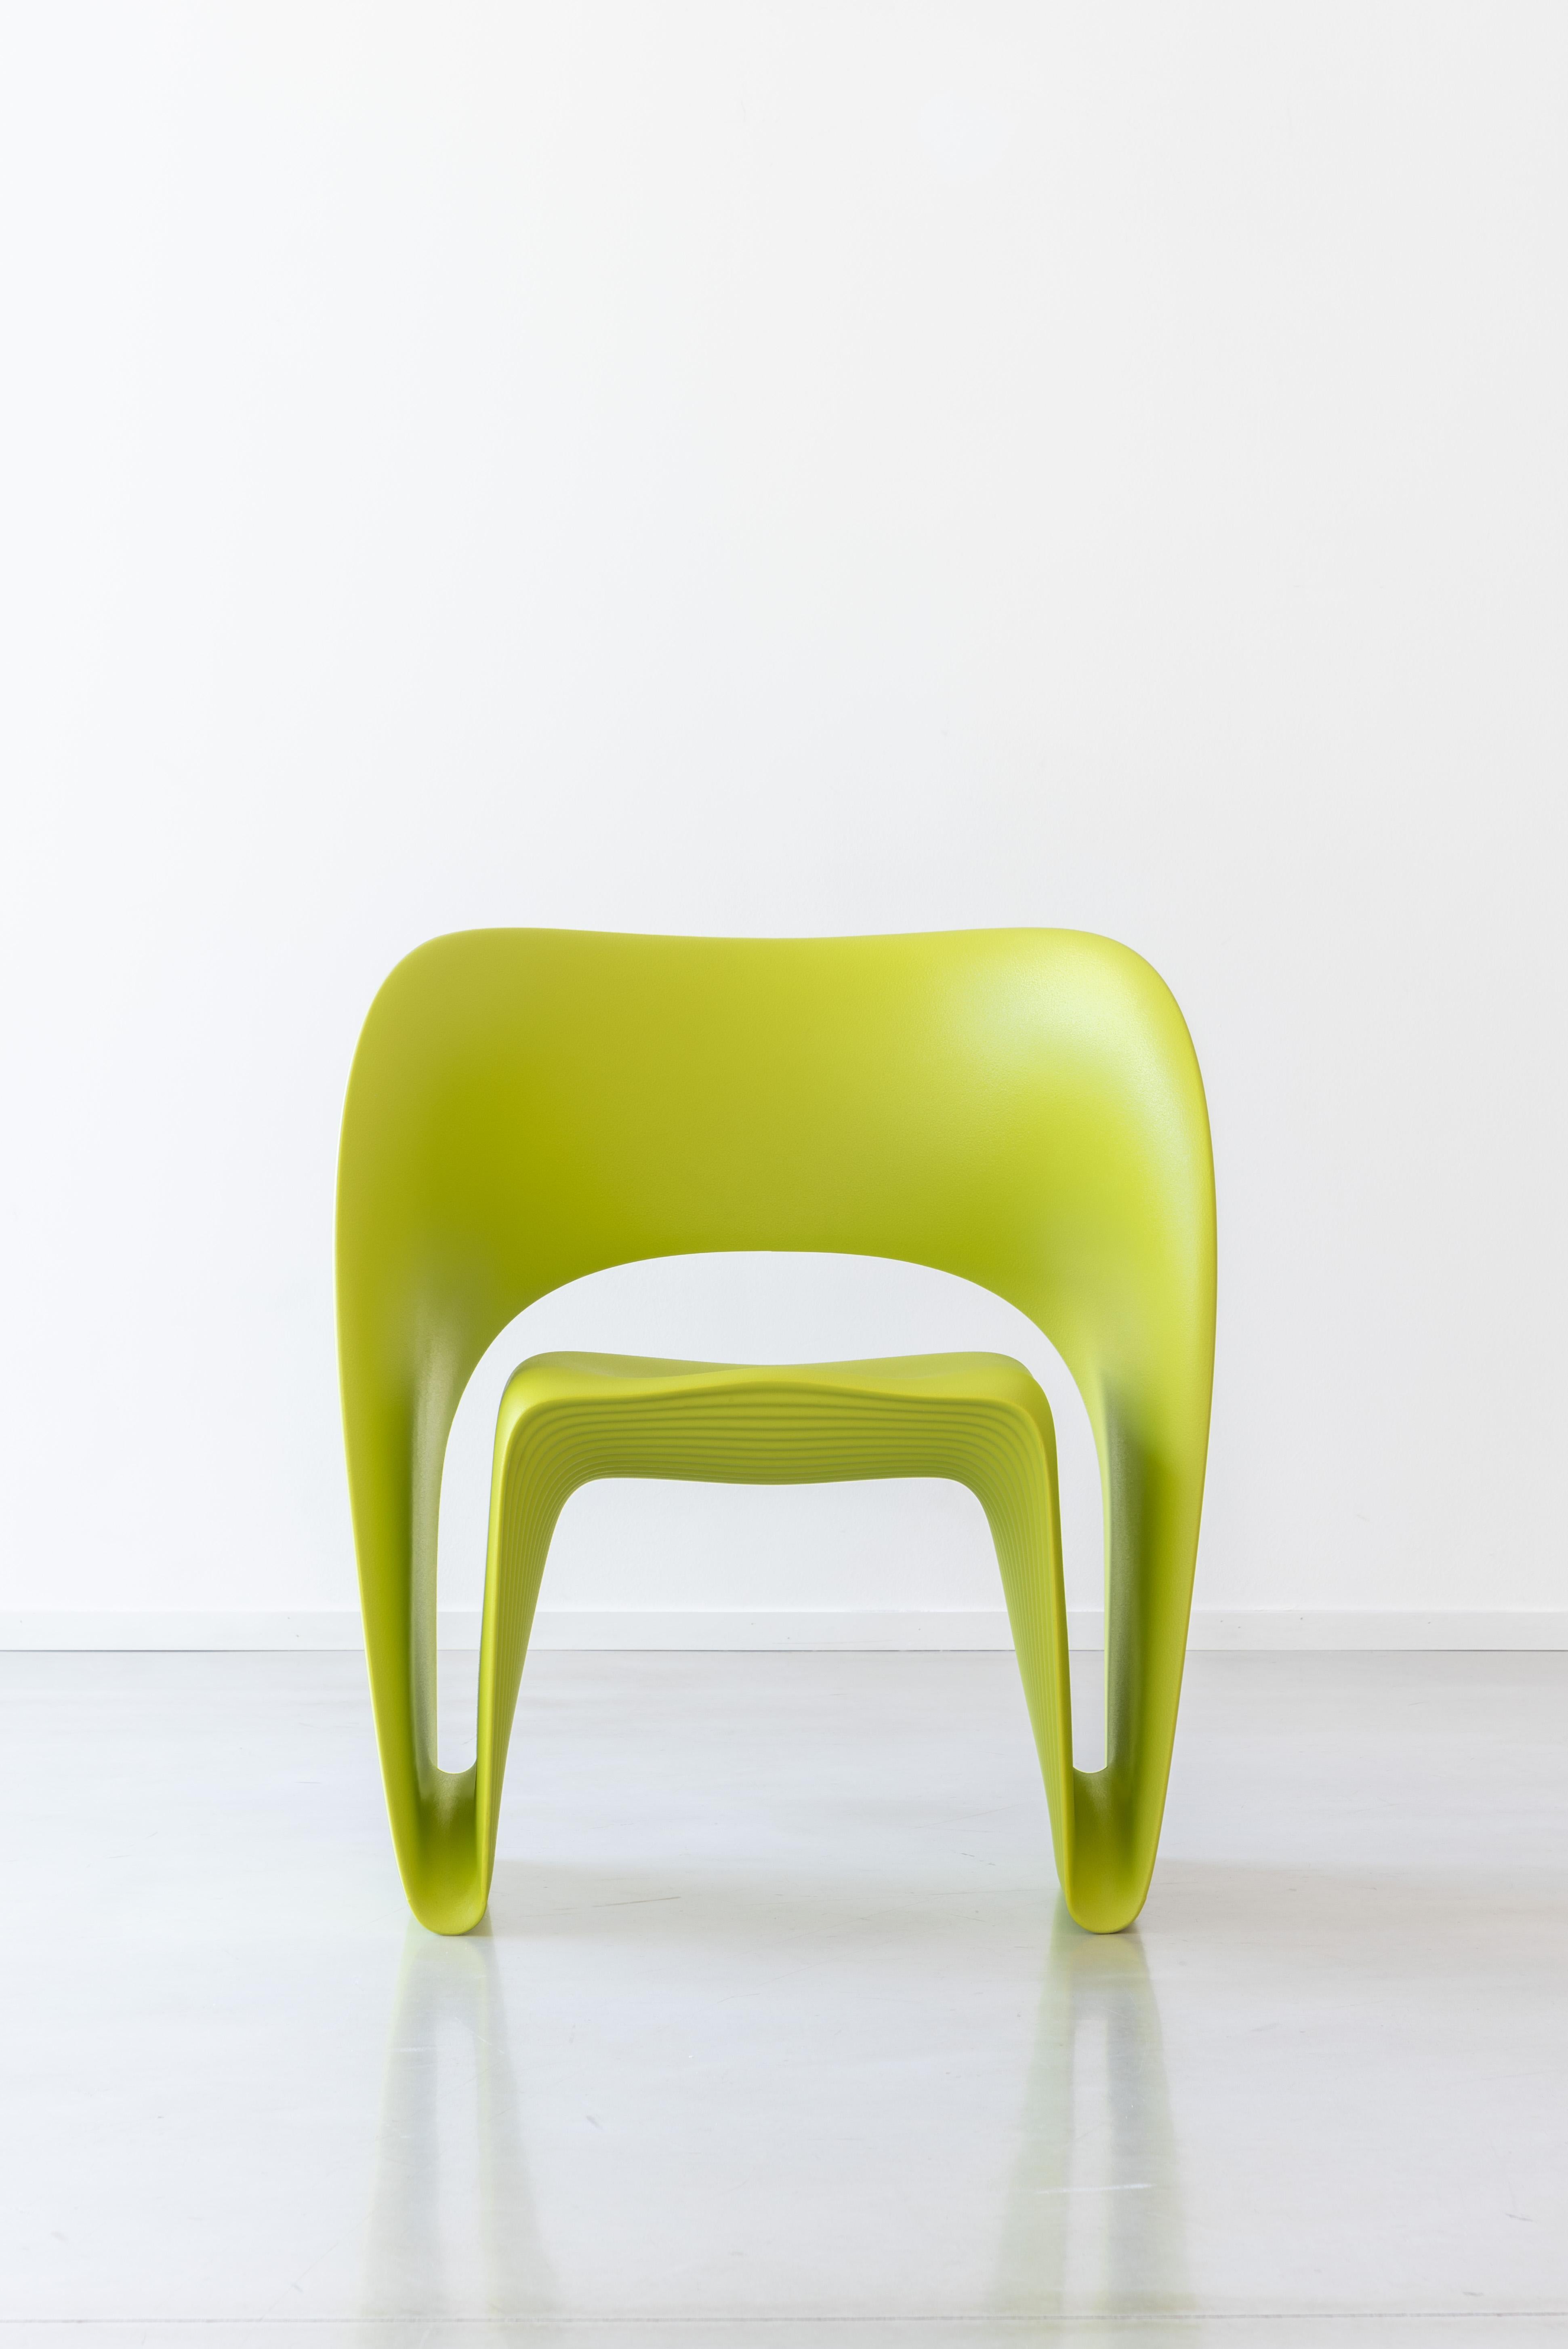 Raviolo LowChair in Olive Green  by Ron Arad for MAGIS For Sale 8